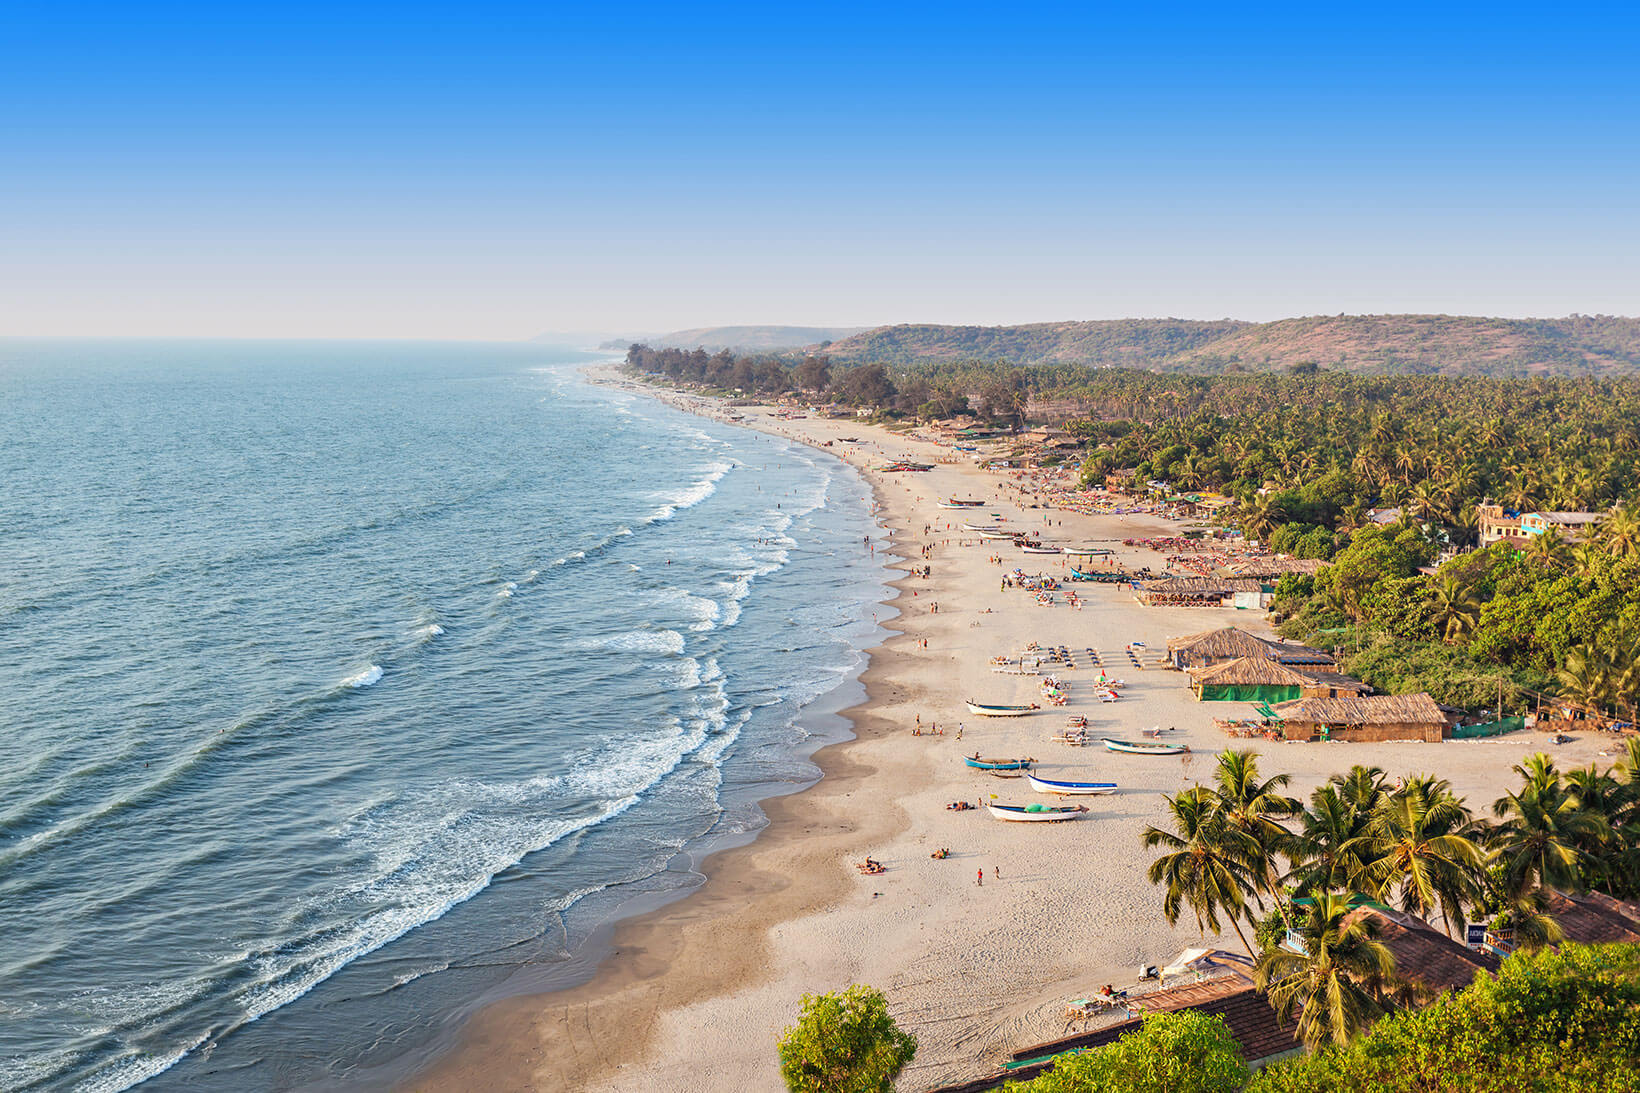 Goa tourism dept to crack down on 11,000 hotels operating illegally